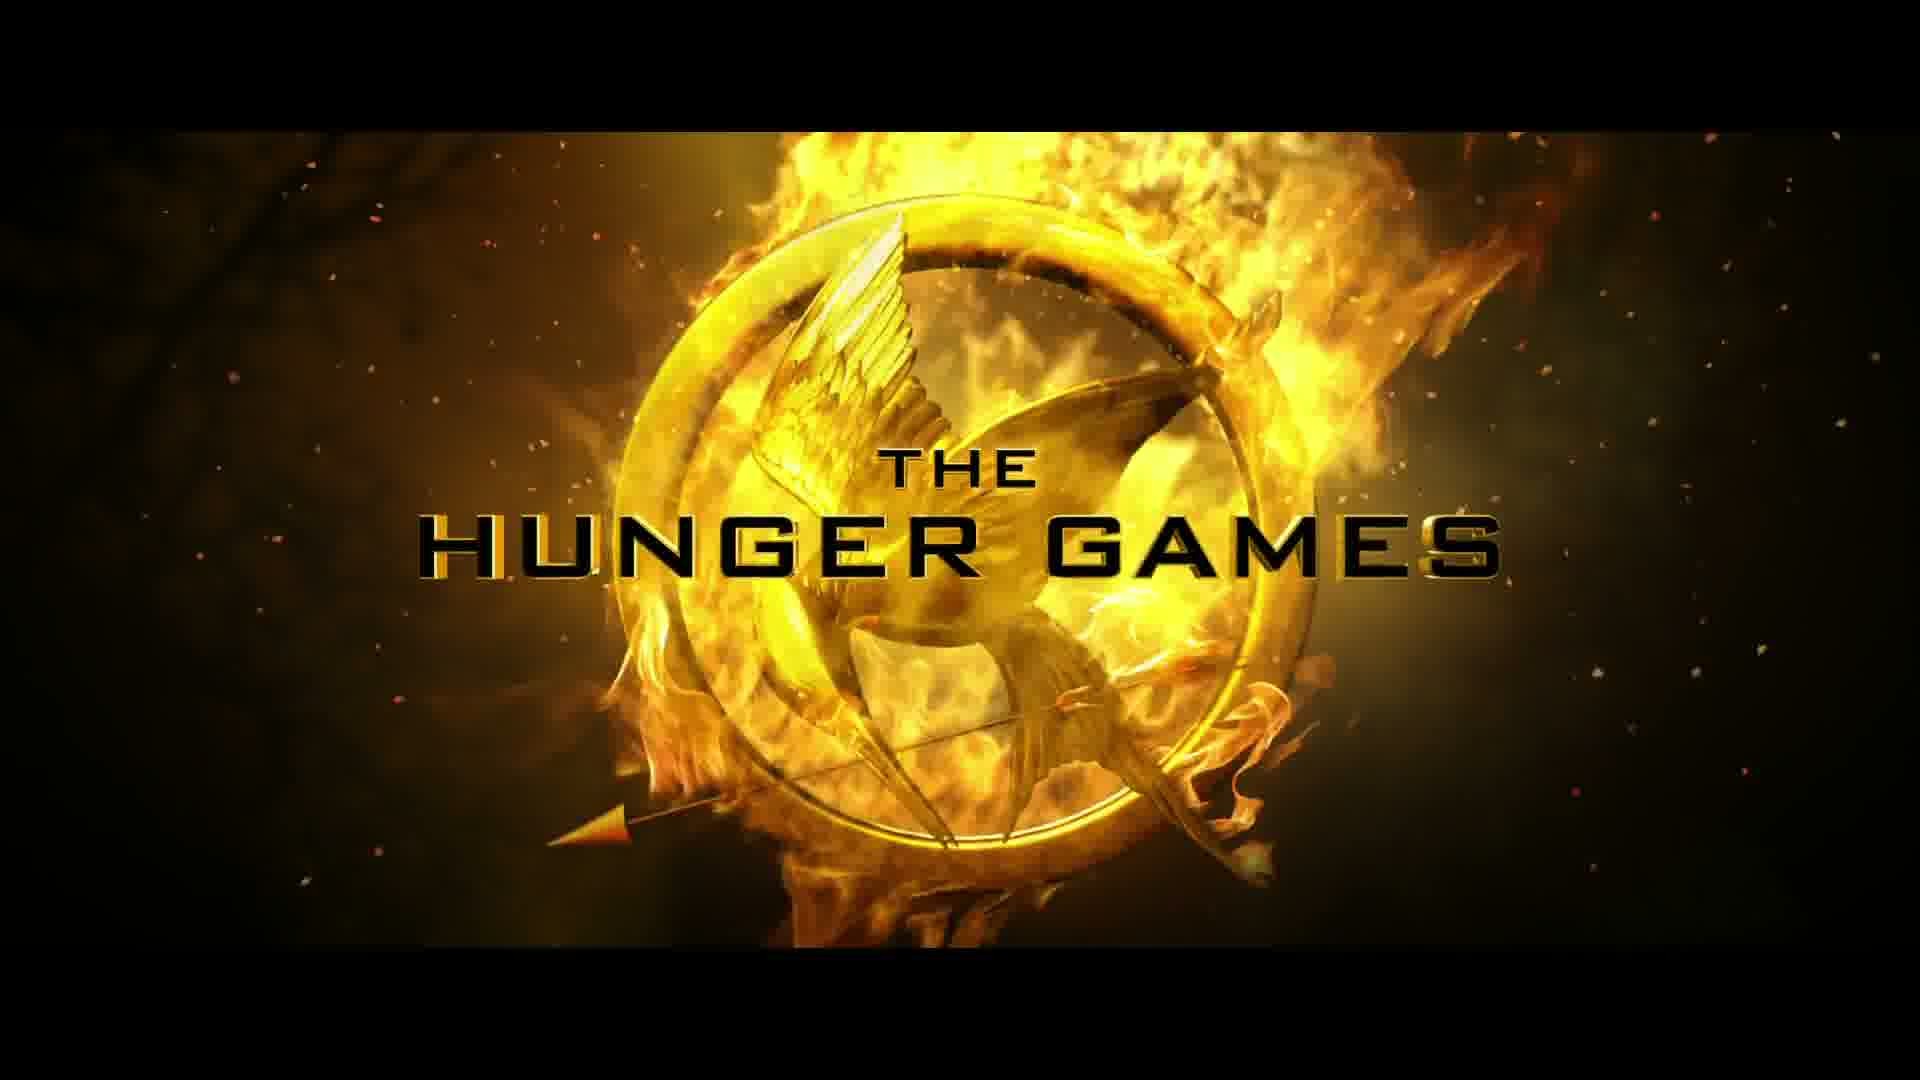 1920x1080 Effie Trinket images 'The Hunger Games' trailer #2 HD wallpaper and  background photos